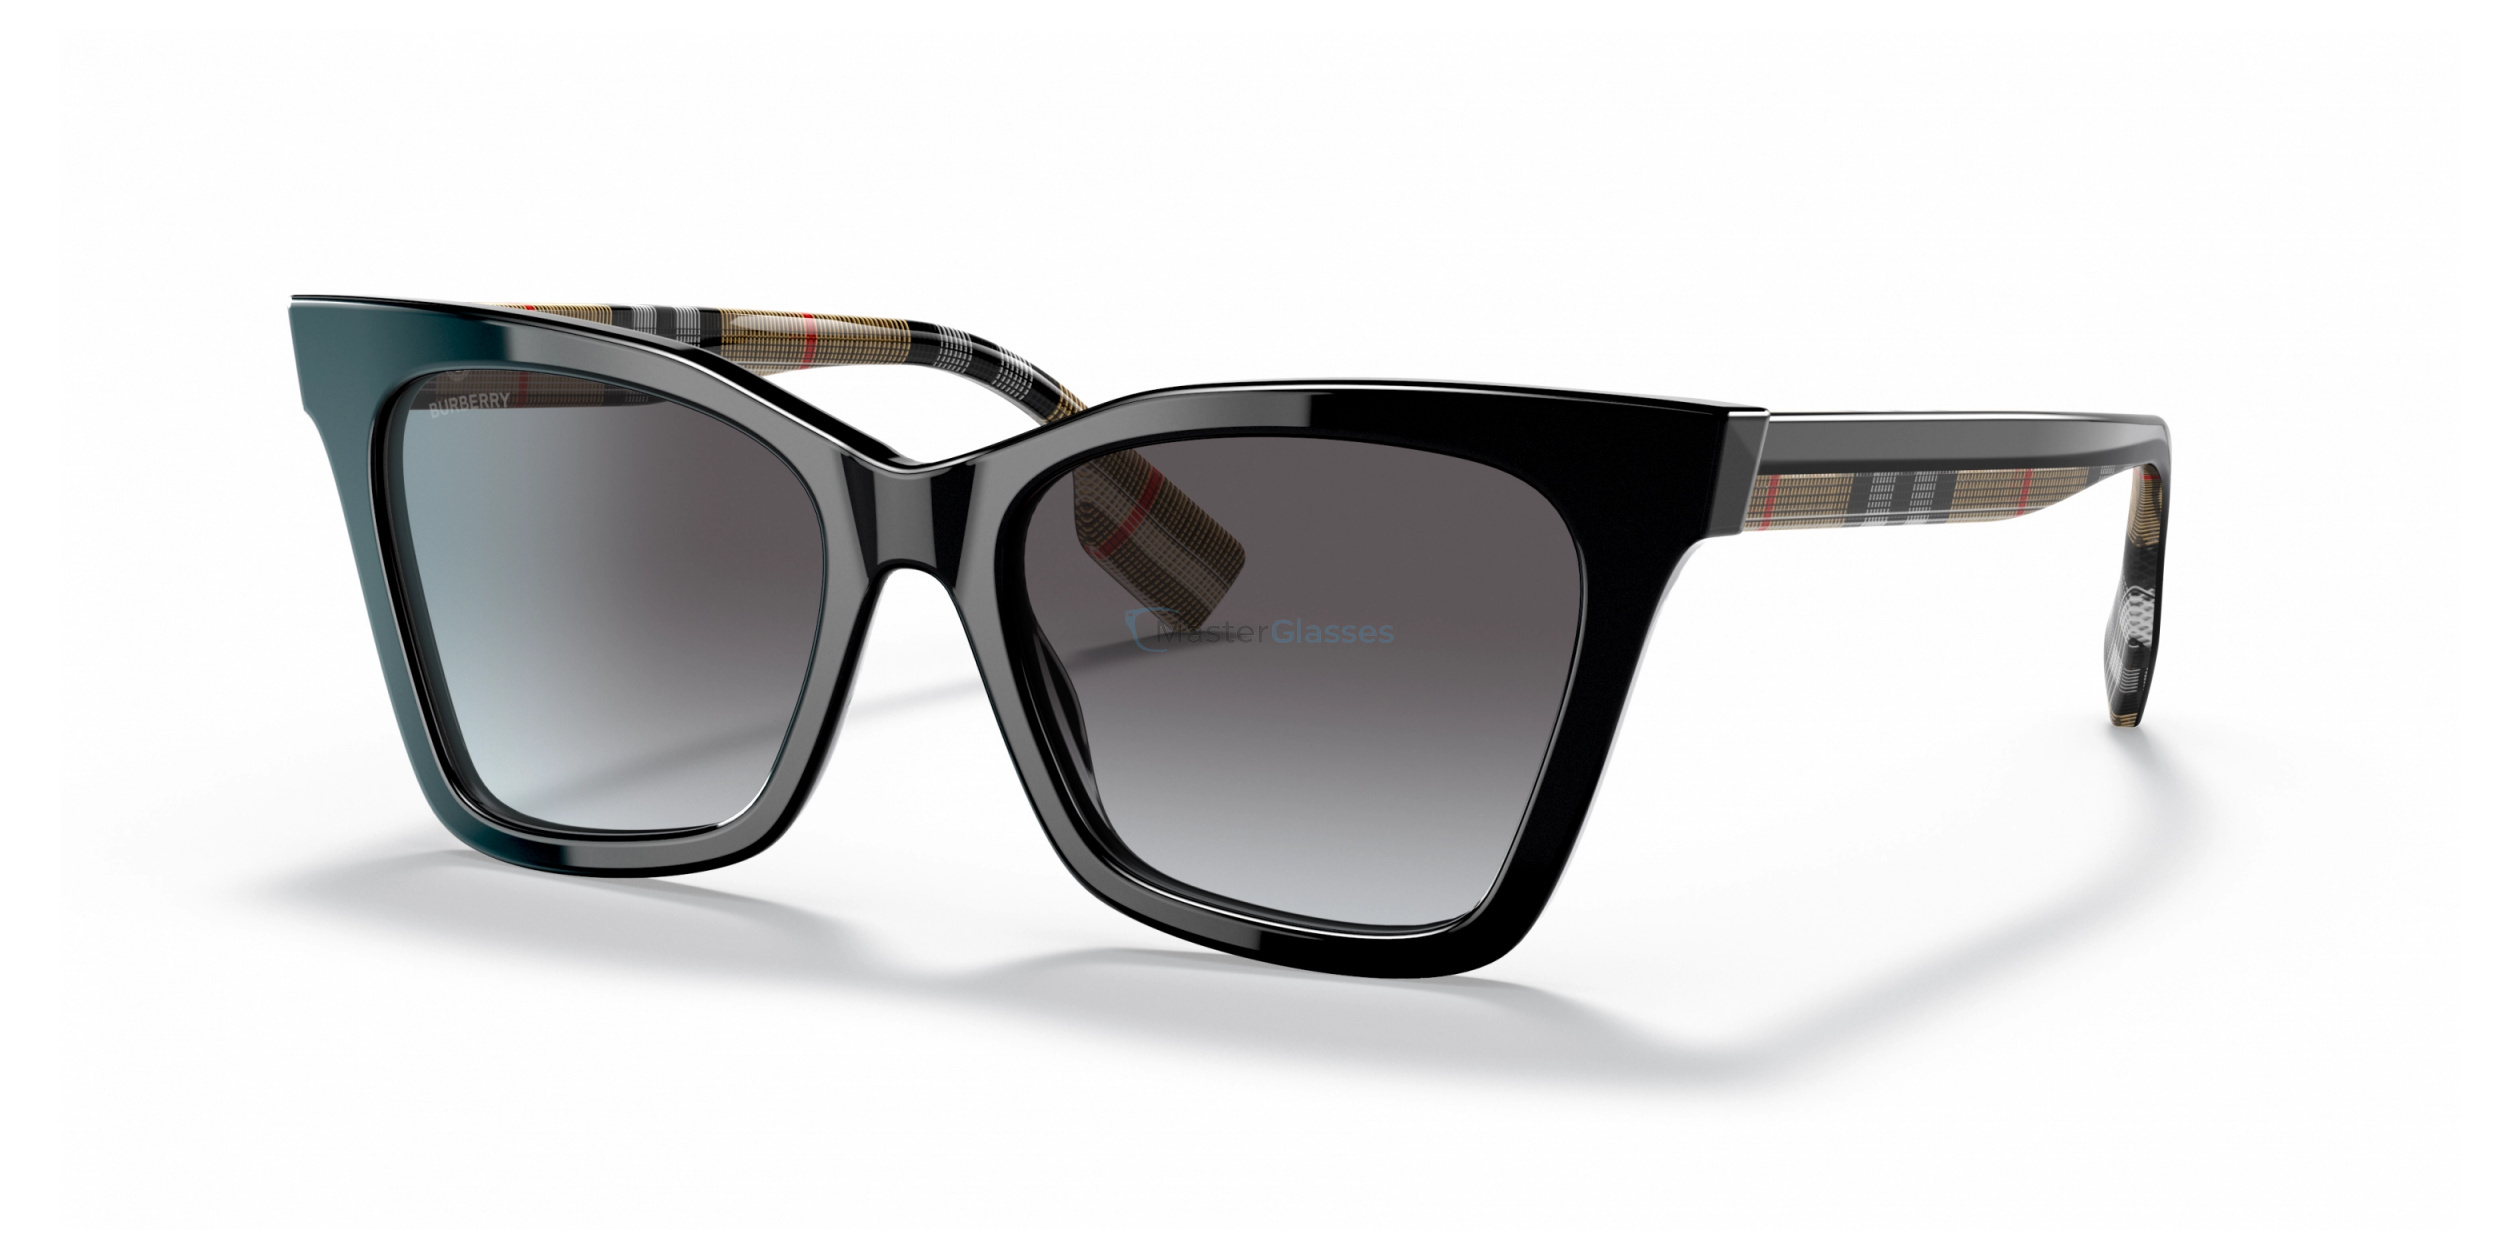 Are These The Best Burberry Sunglasses For You in 2023